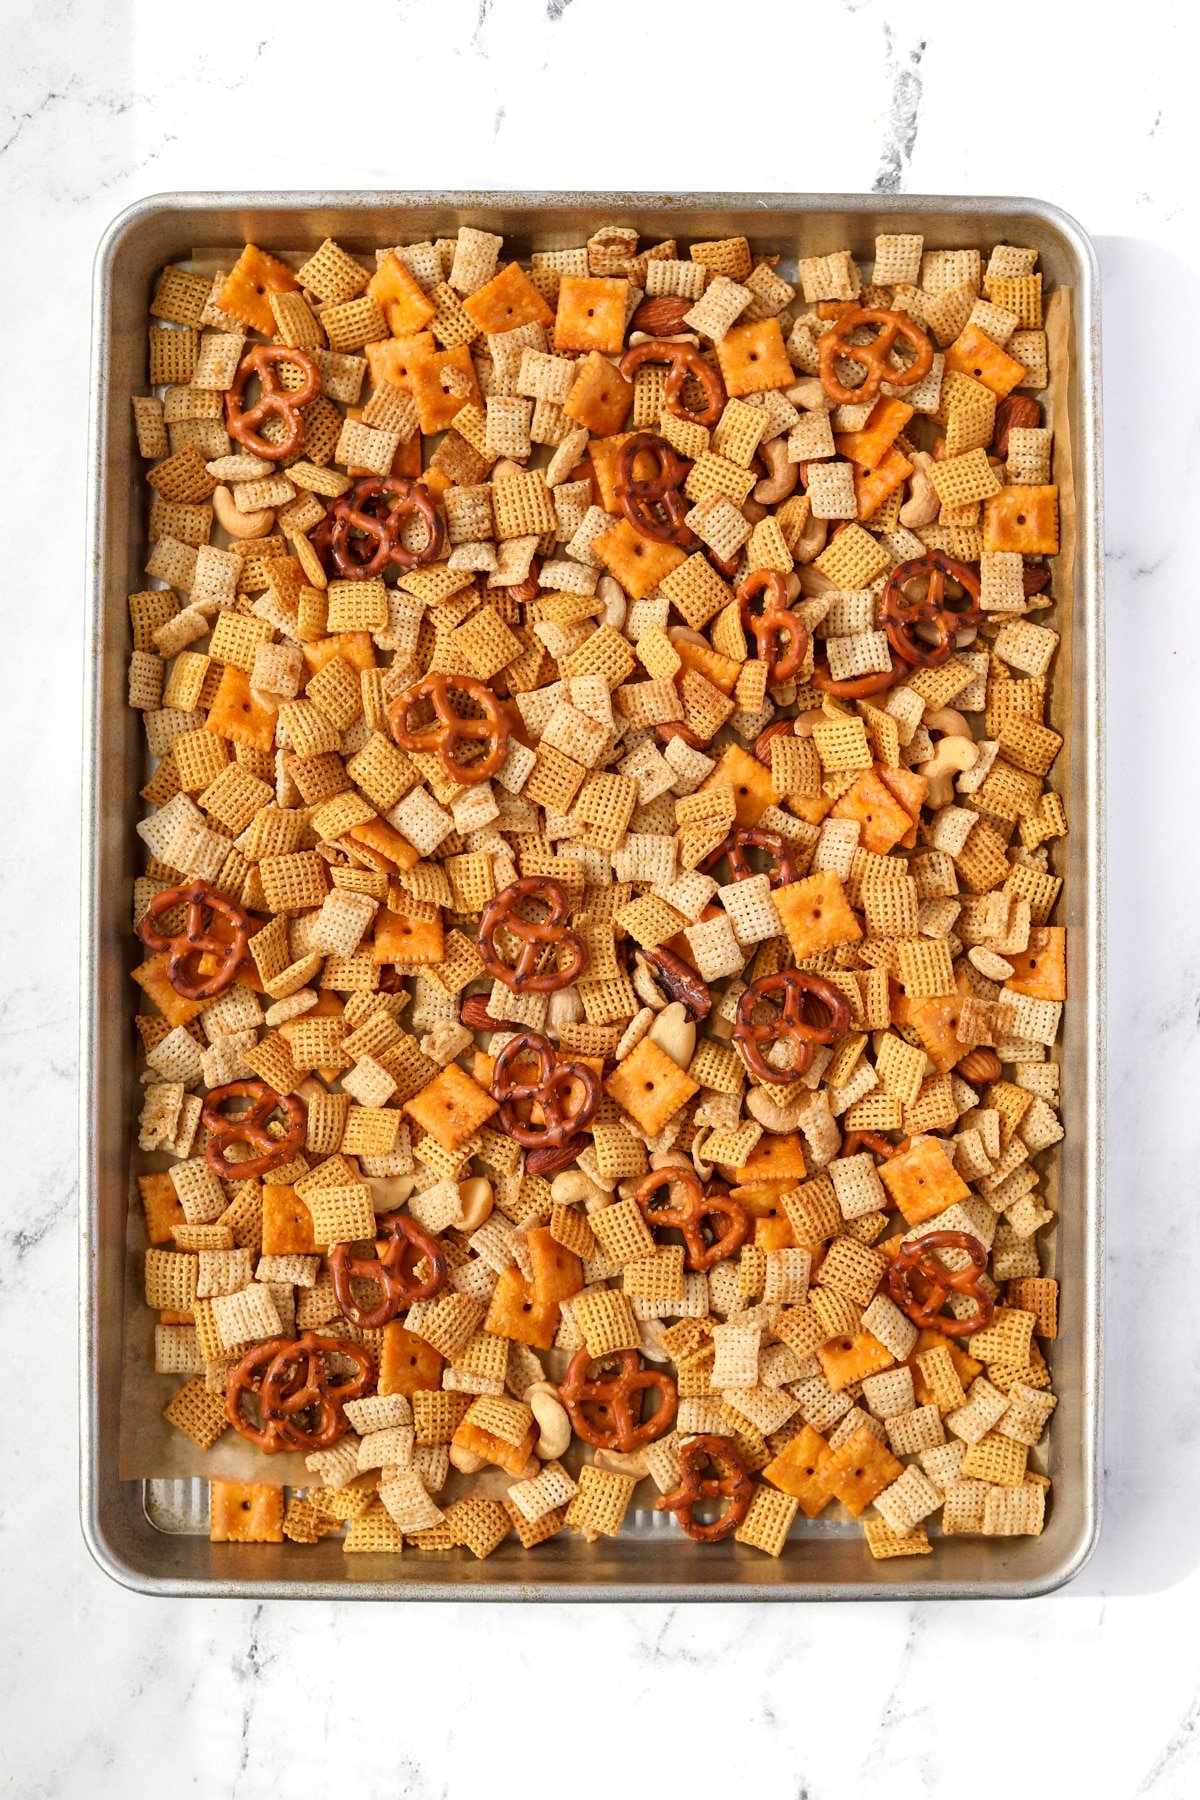 A baking sheet filled with snack mix with pretzels, cereal, and crackers.